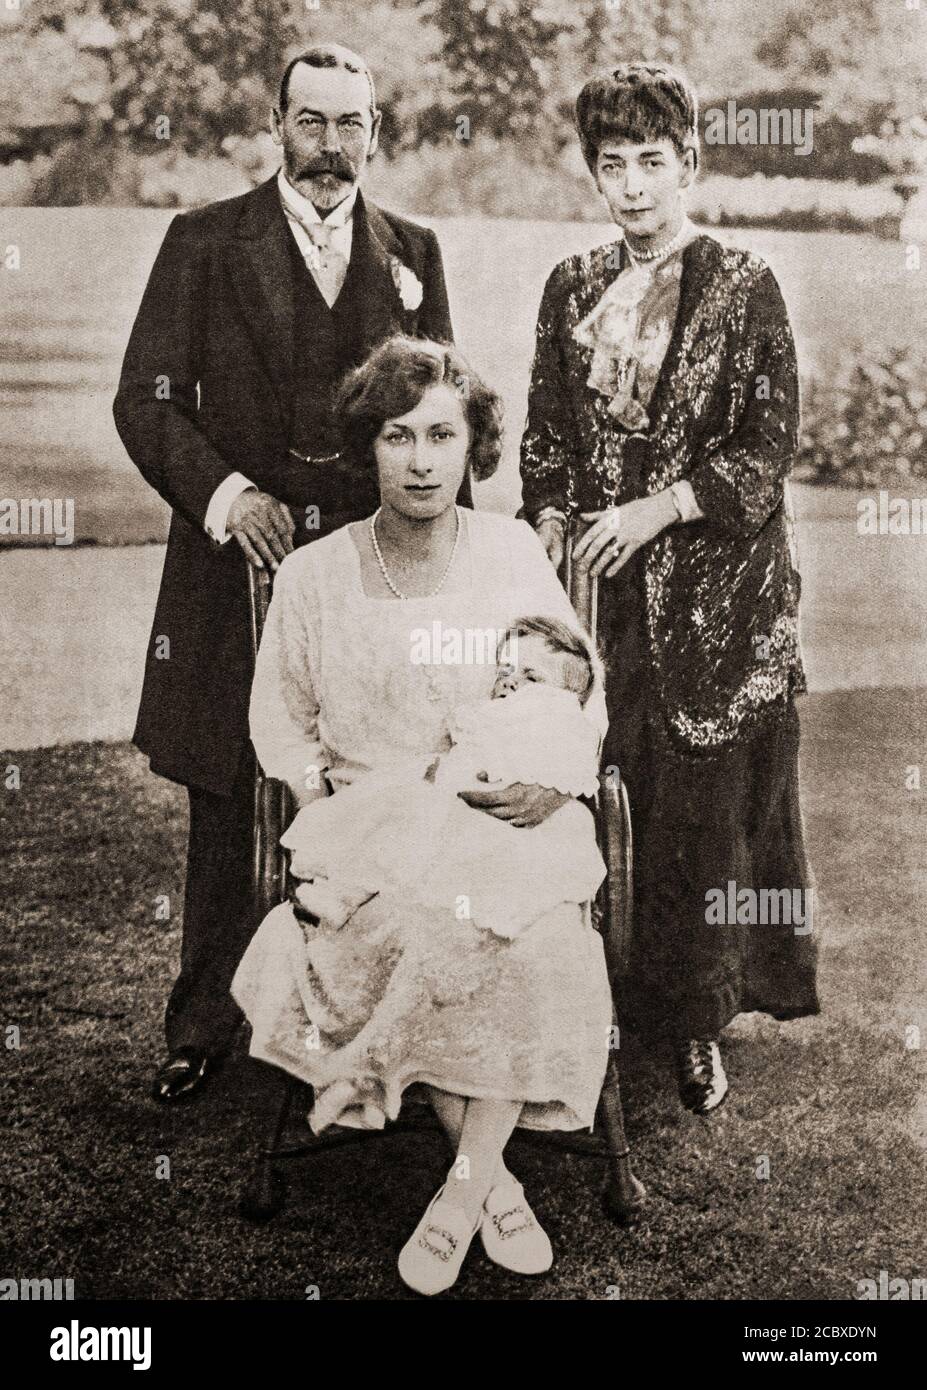 Four generations of Royals in 1923. Queen Alexandra, wife of the late King Edward VII, King George V and his daughter Mary, Princess Royal and Countess of Harewood and her baby son, George Henry Hubert Lascelles, 7th Earl of Harewood. Stock Photo